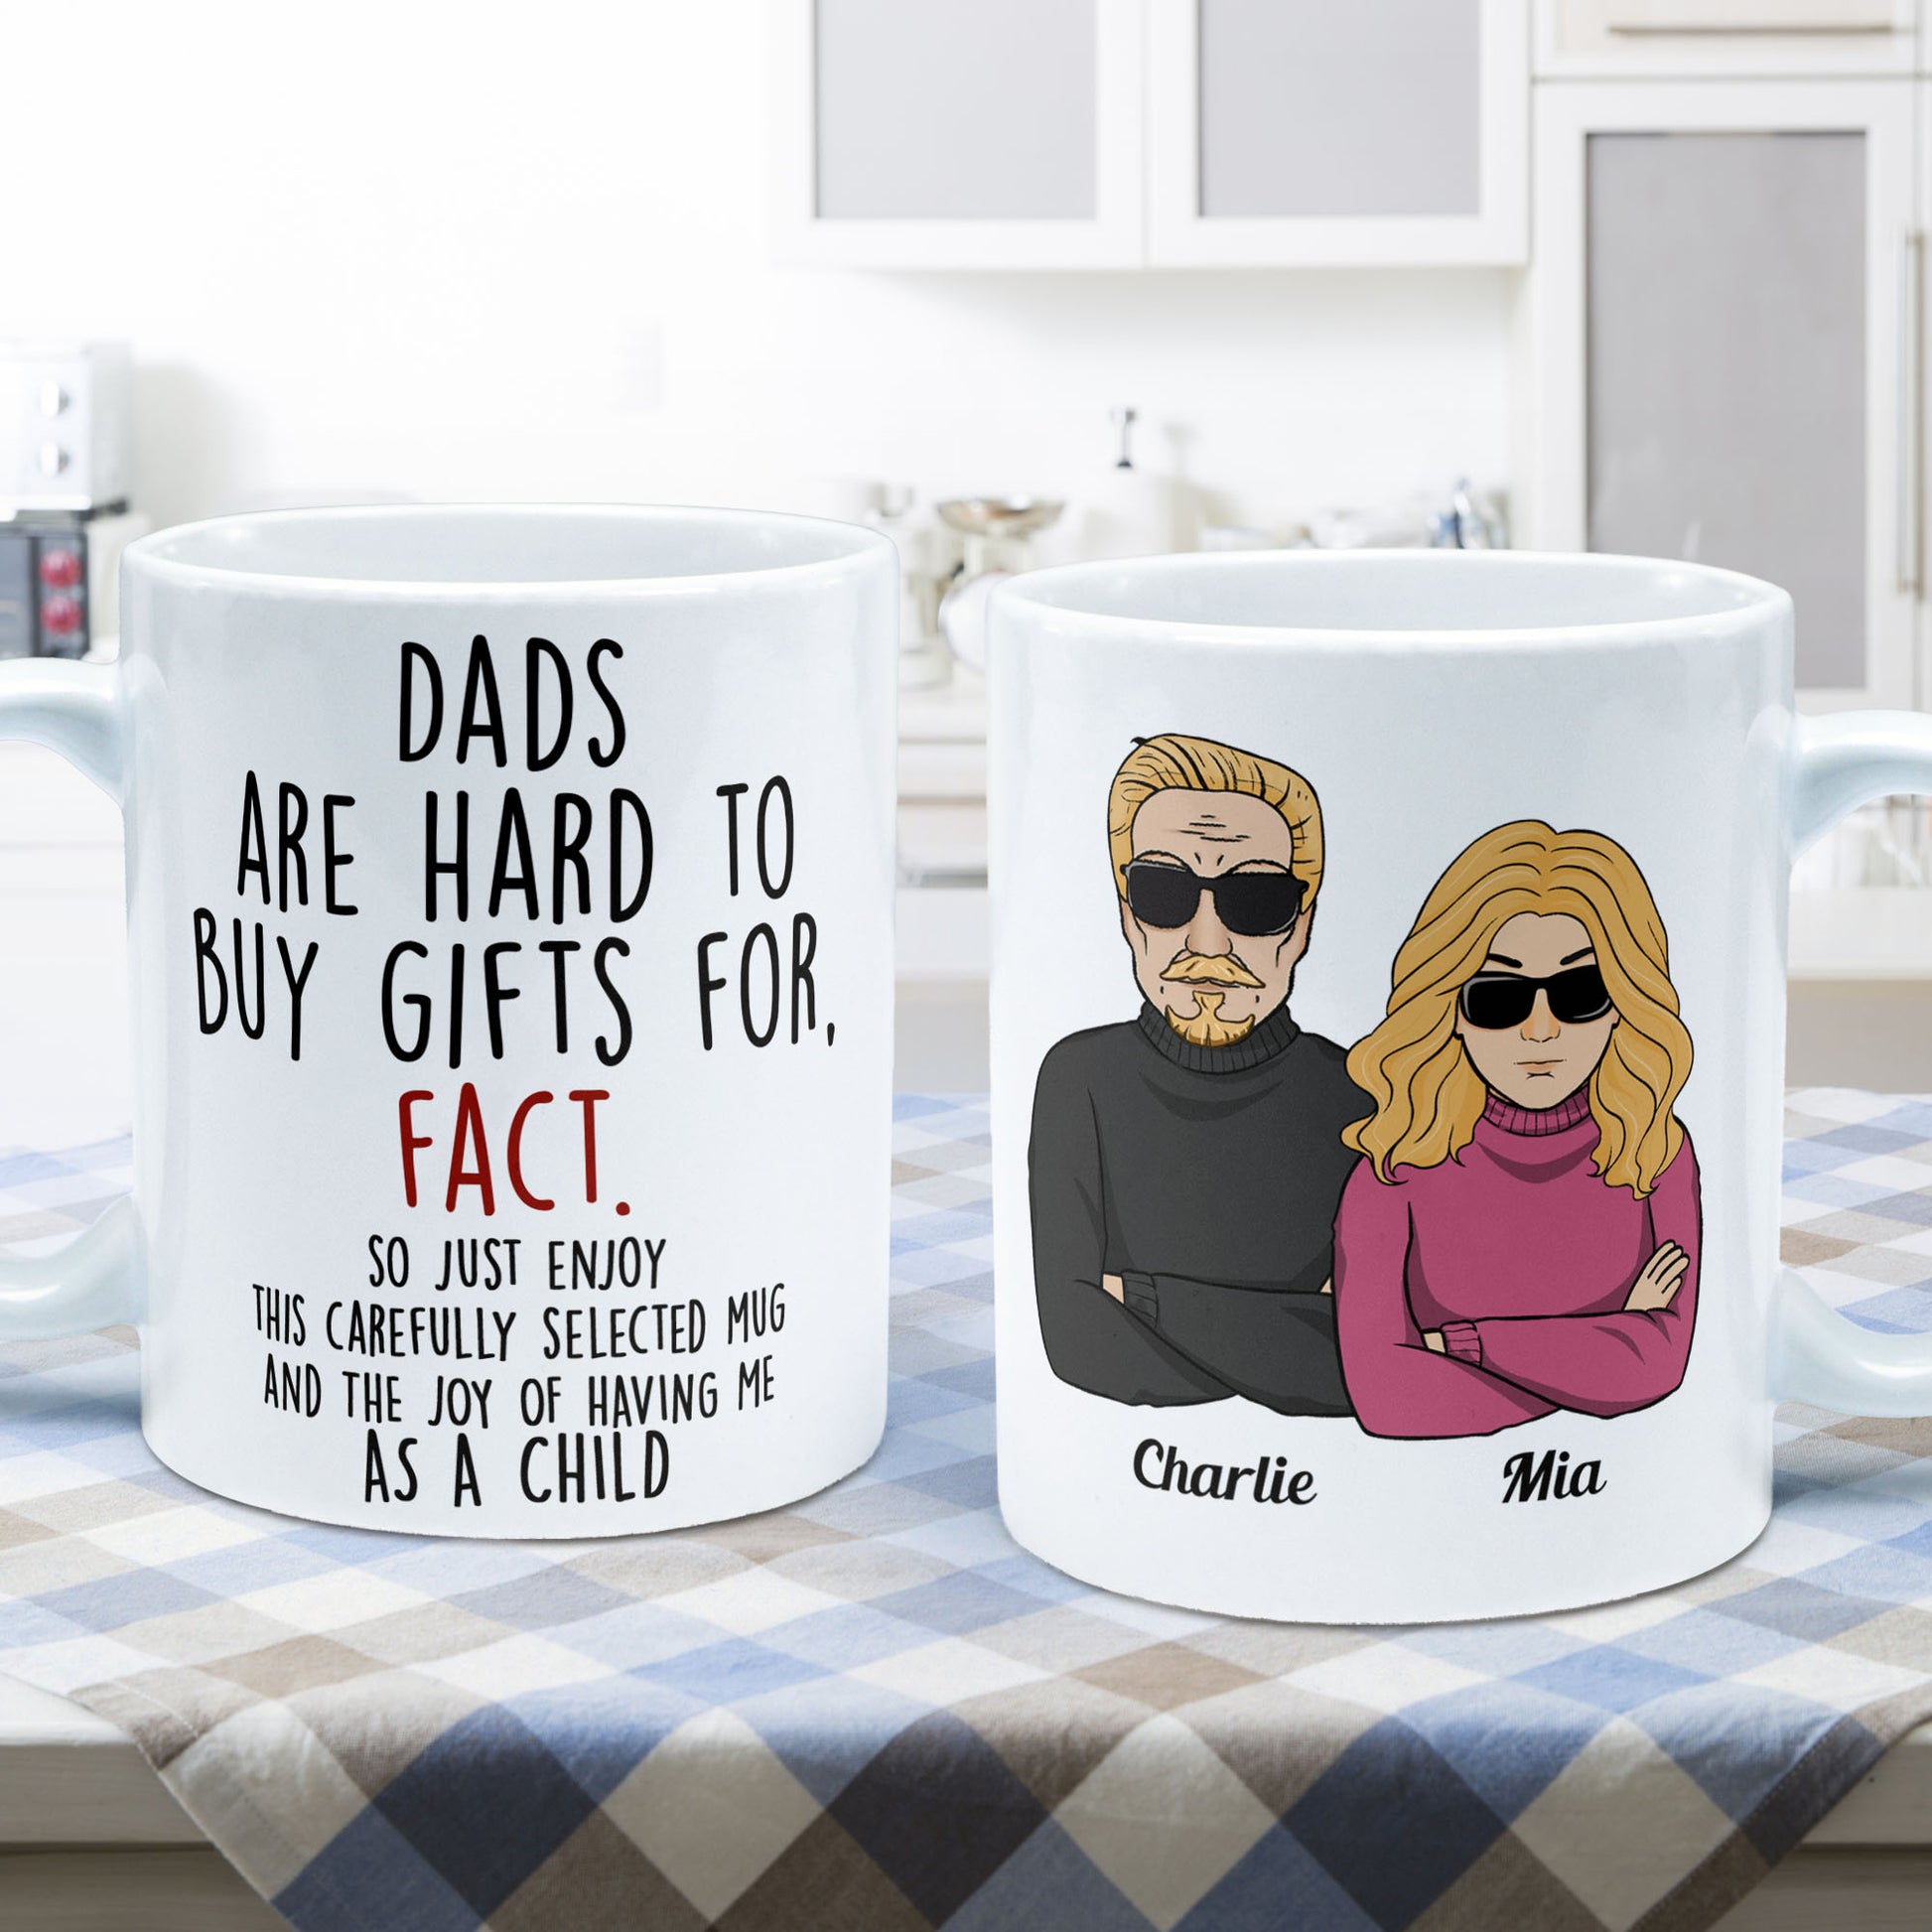 Coffee Mug Fishing, Funny, Gifts for Men Women Coworker Family Lover  Special Gifts for Birthday Christmas Funny Gifts Presents Gifts 934496